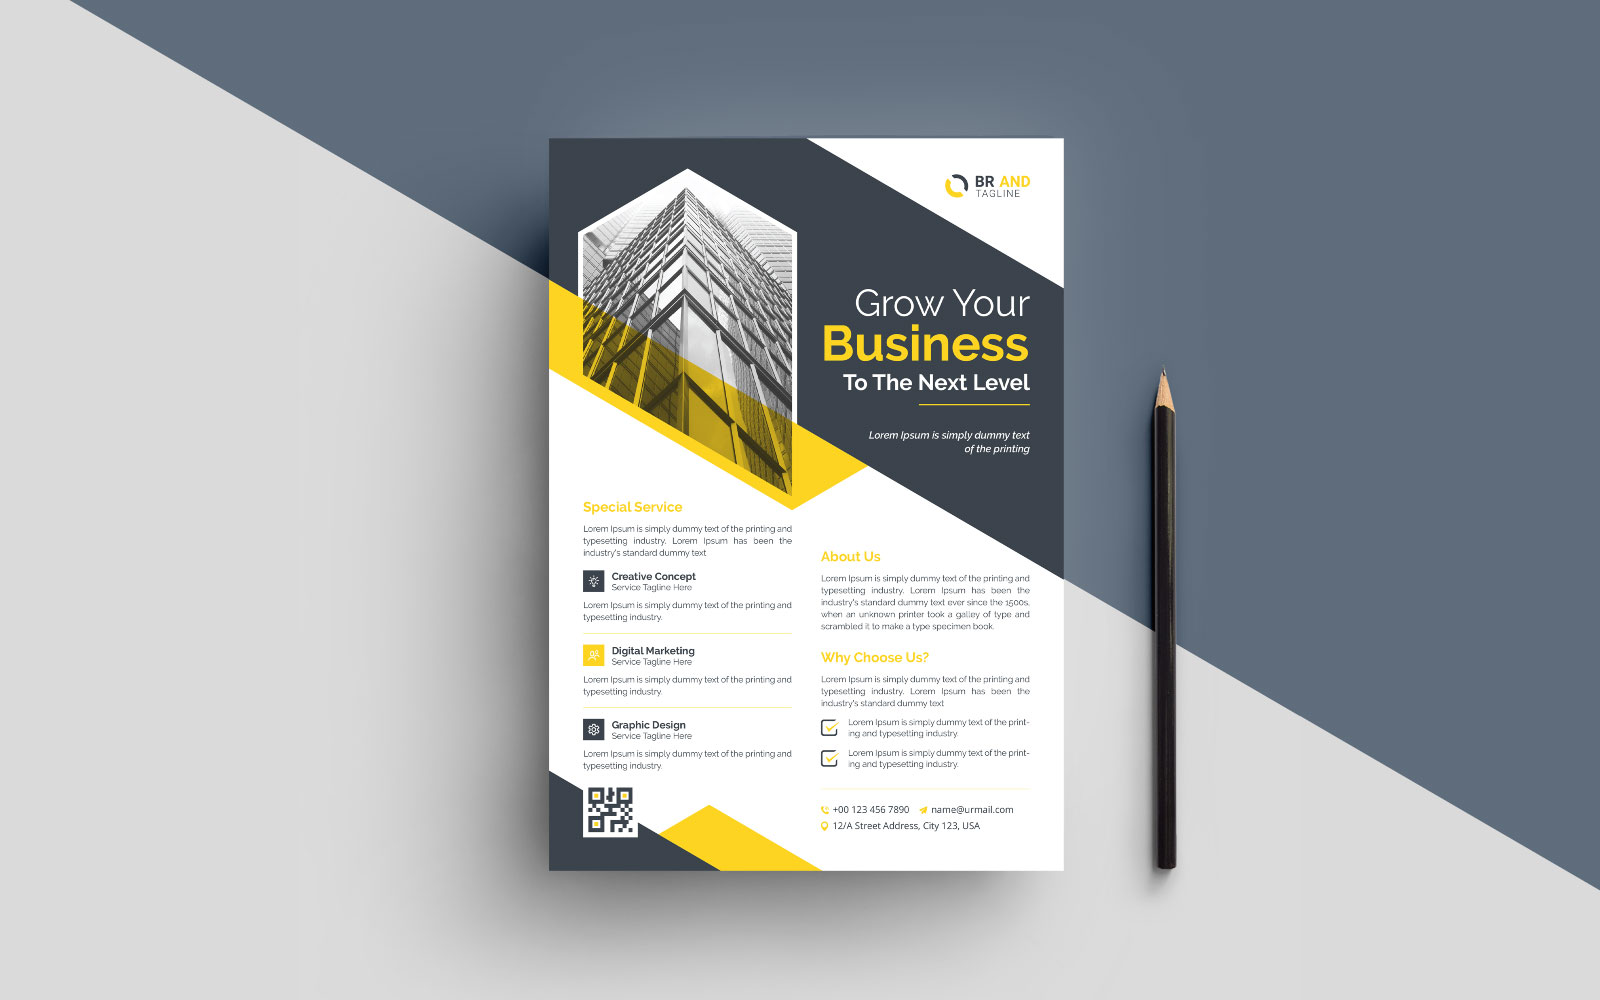 Corporate or Business Flyer Design Template